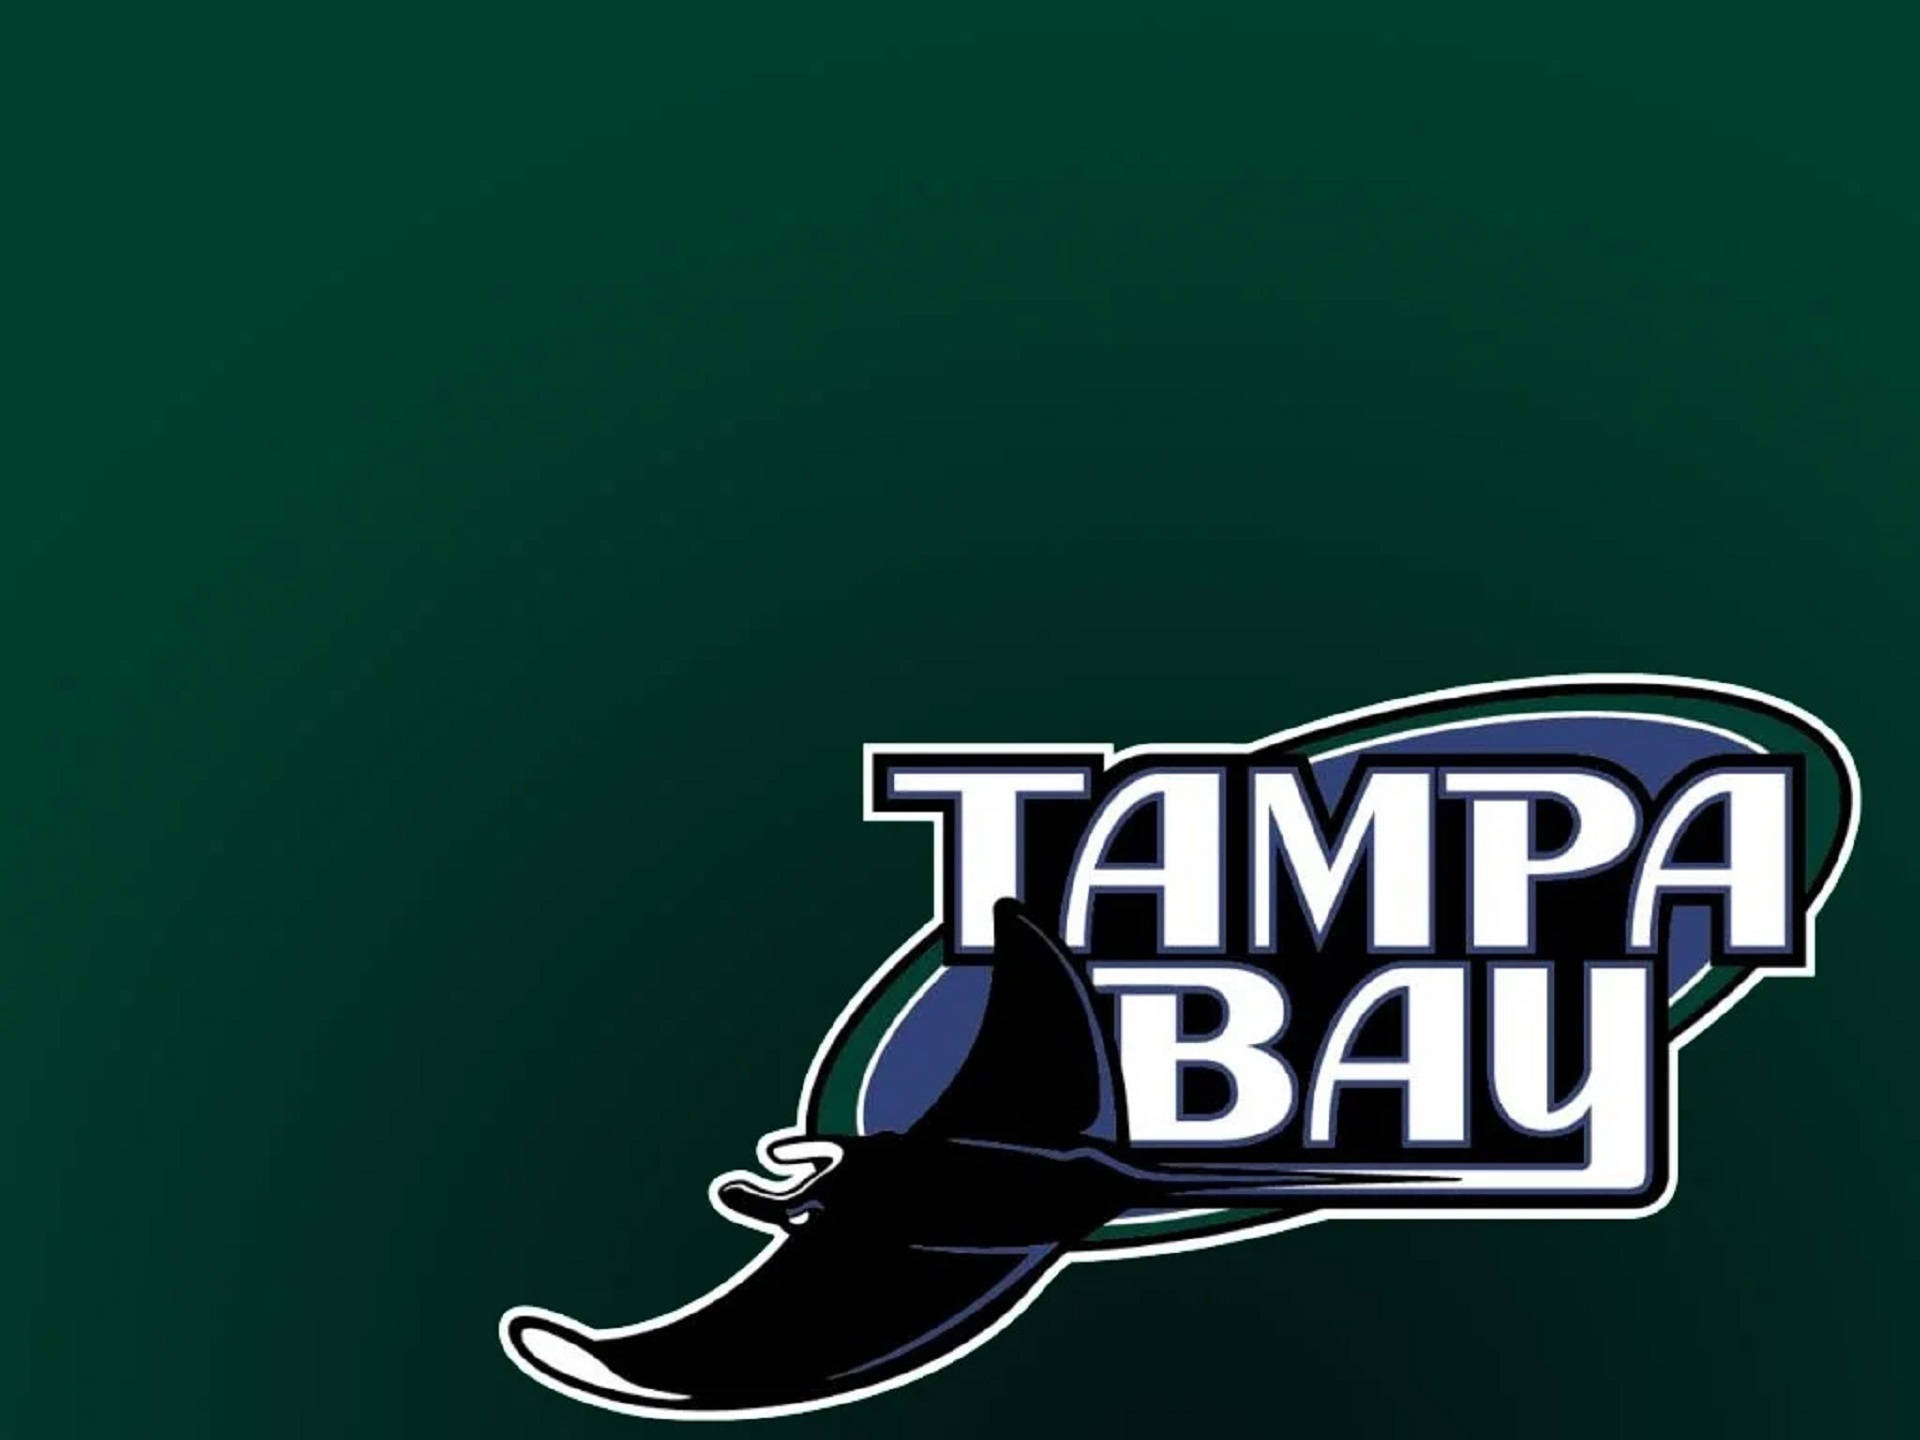 Tampa Bay Rays In Green